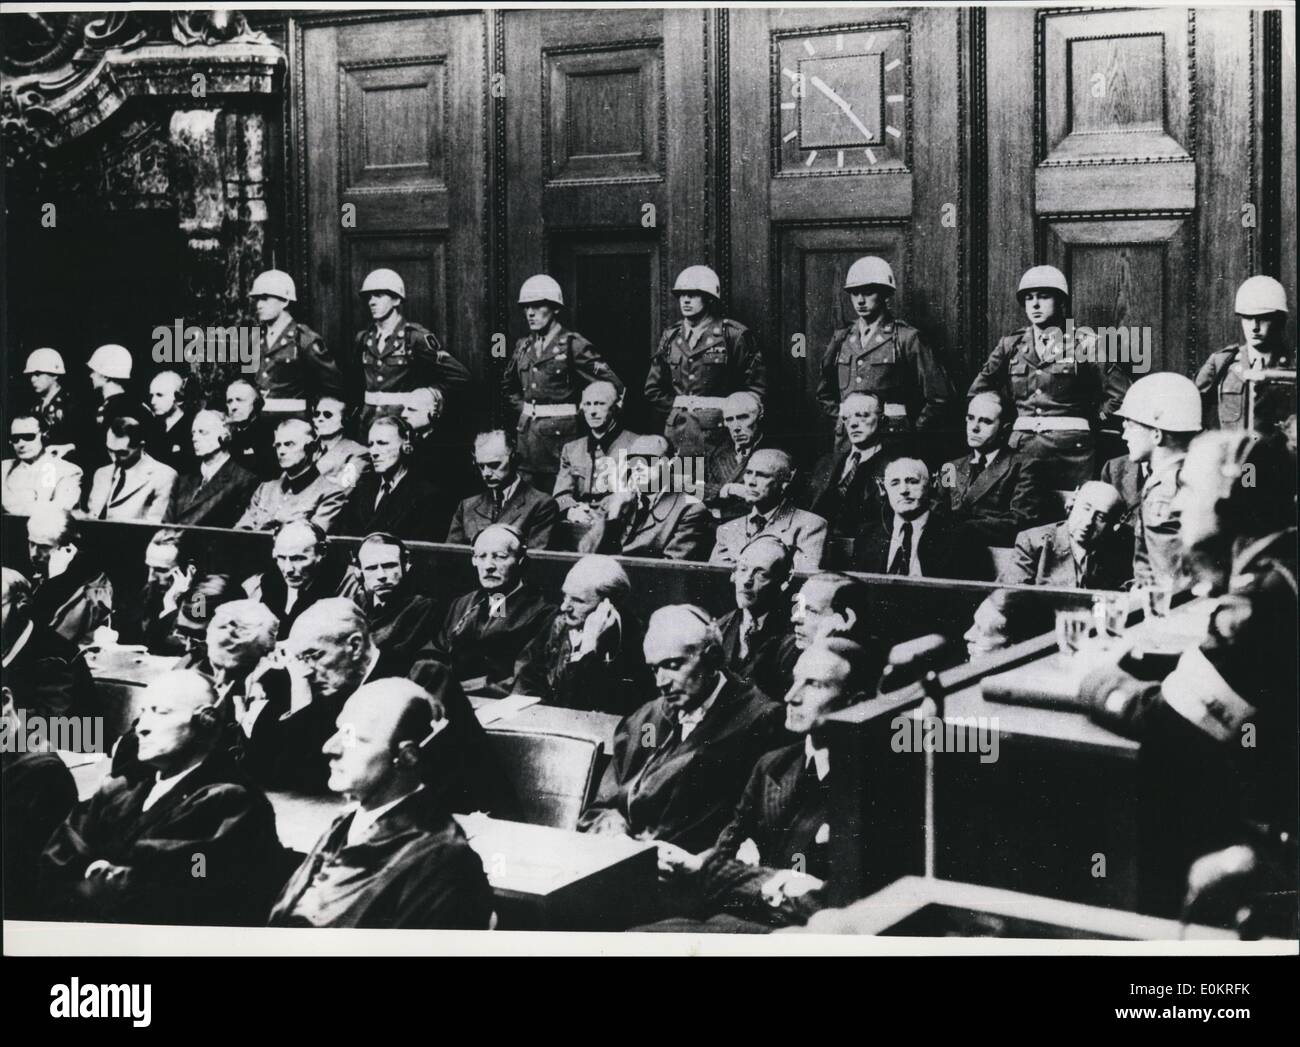 Oct. 10, 1946 - Pronouncing of the Judgments at the Nuremberg trial: 30 year ago, on October 1st 1946, the judgements at the Nuremberg war criminal trial were announced. At this largest trial of history, The following persons were sentenced to hang: Ribbentrop, sauckel, katenbrunner, frick frank, stroicher, satB-inquart, rosenberg, keitel and jodi. Ley committed suicide before the judgement, goring afterwards; Bormann had been condemned to death in absence Stock Photo